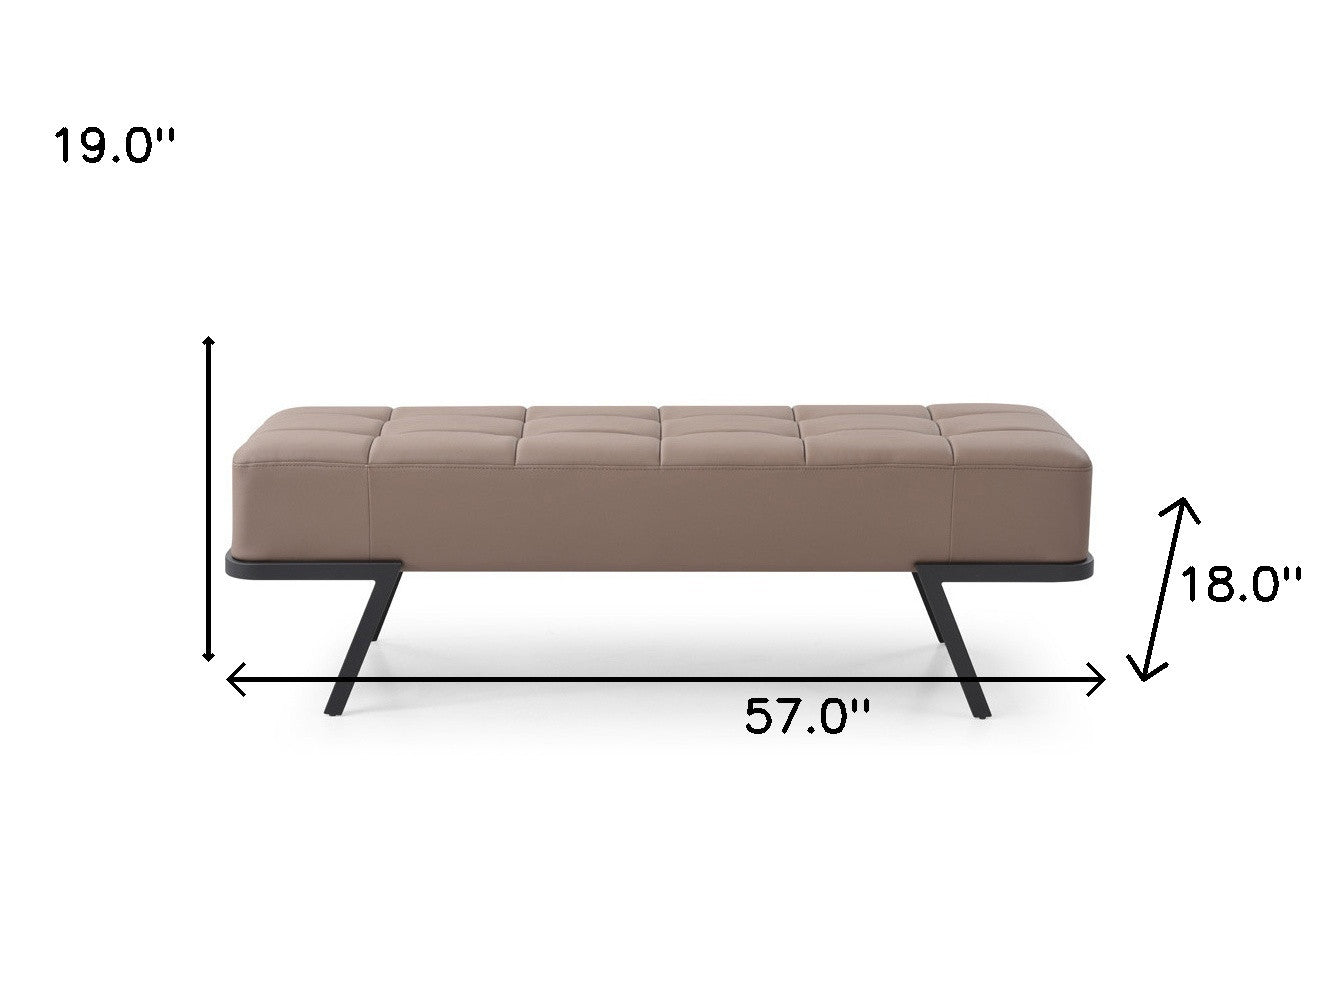 57" Taupe and Black Upholstered Faux Leather Bench